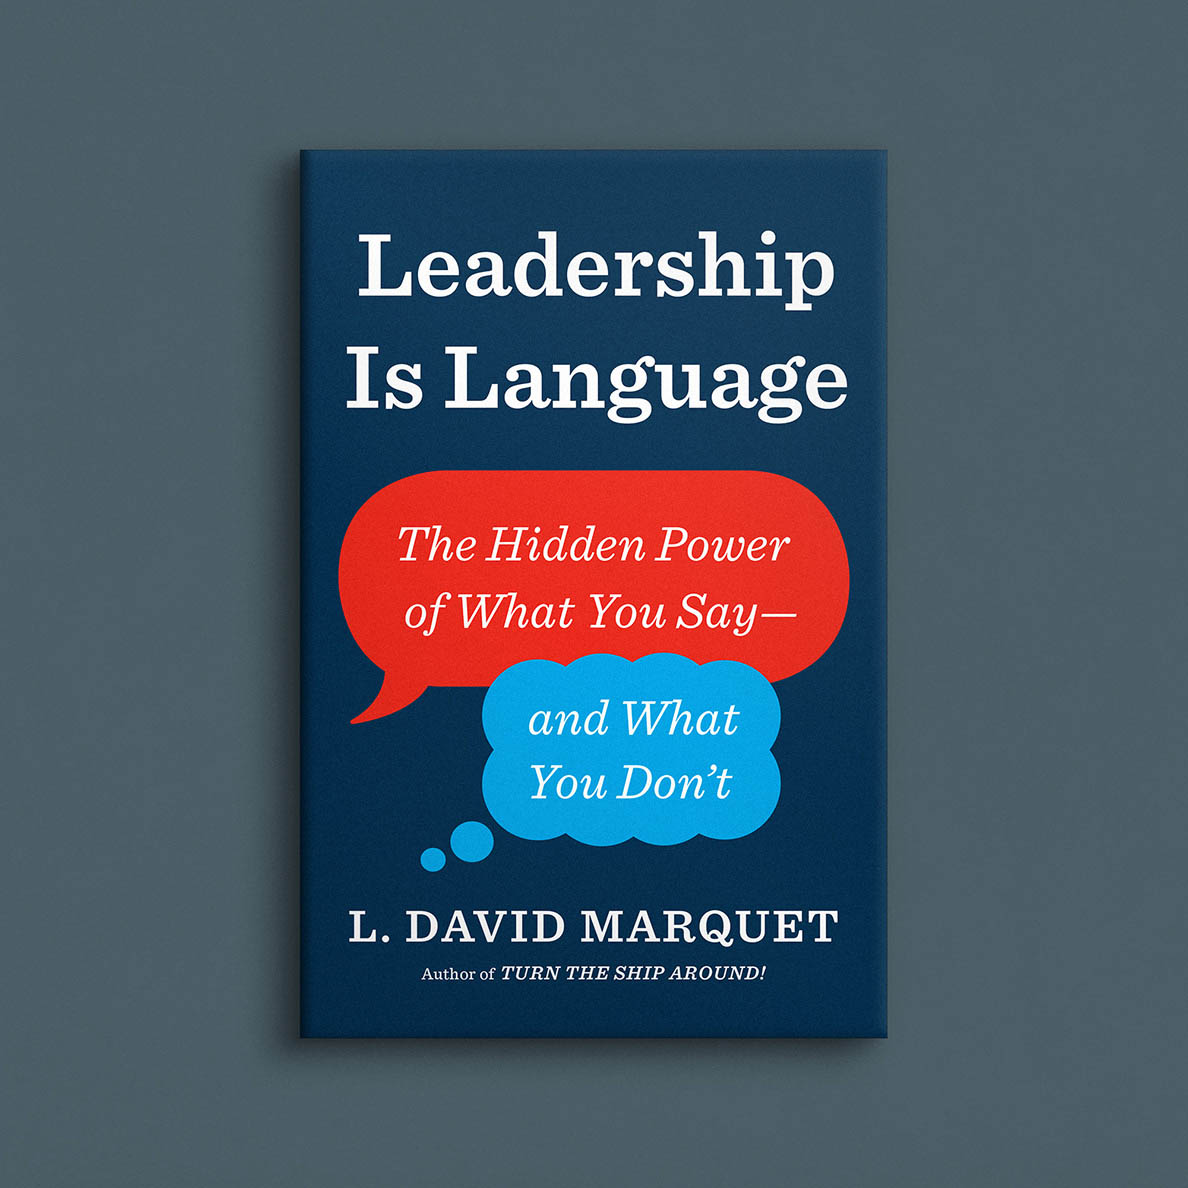 Leadership Is Language book cover